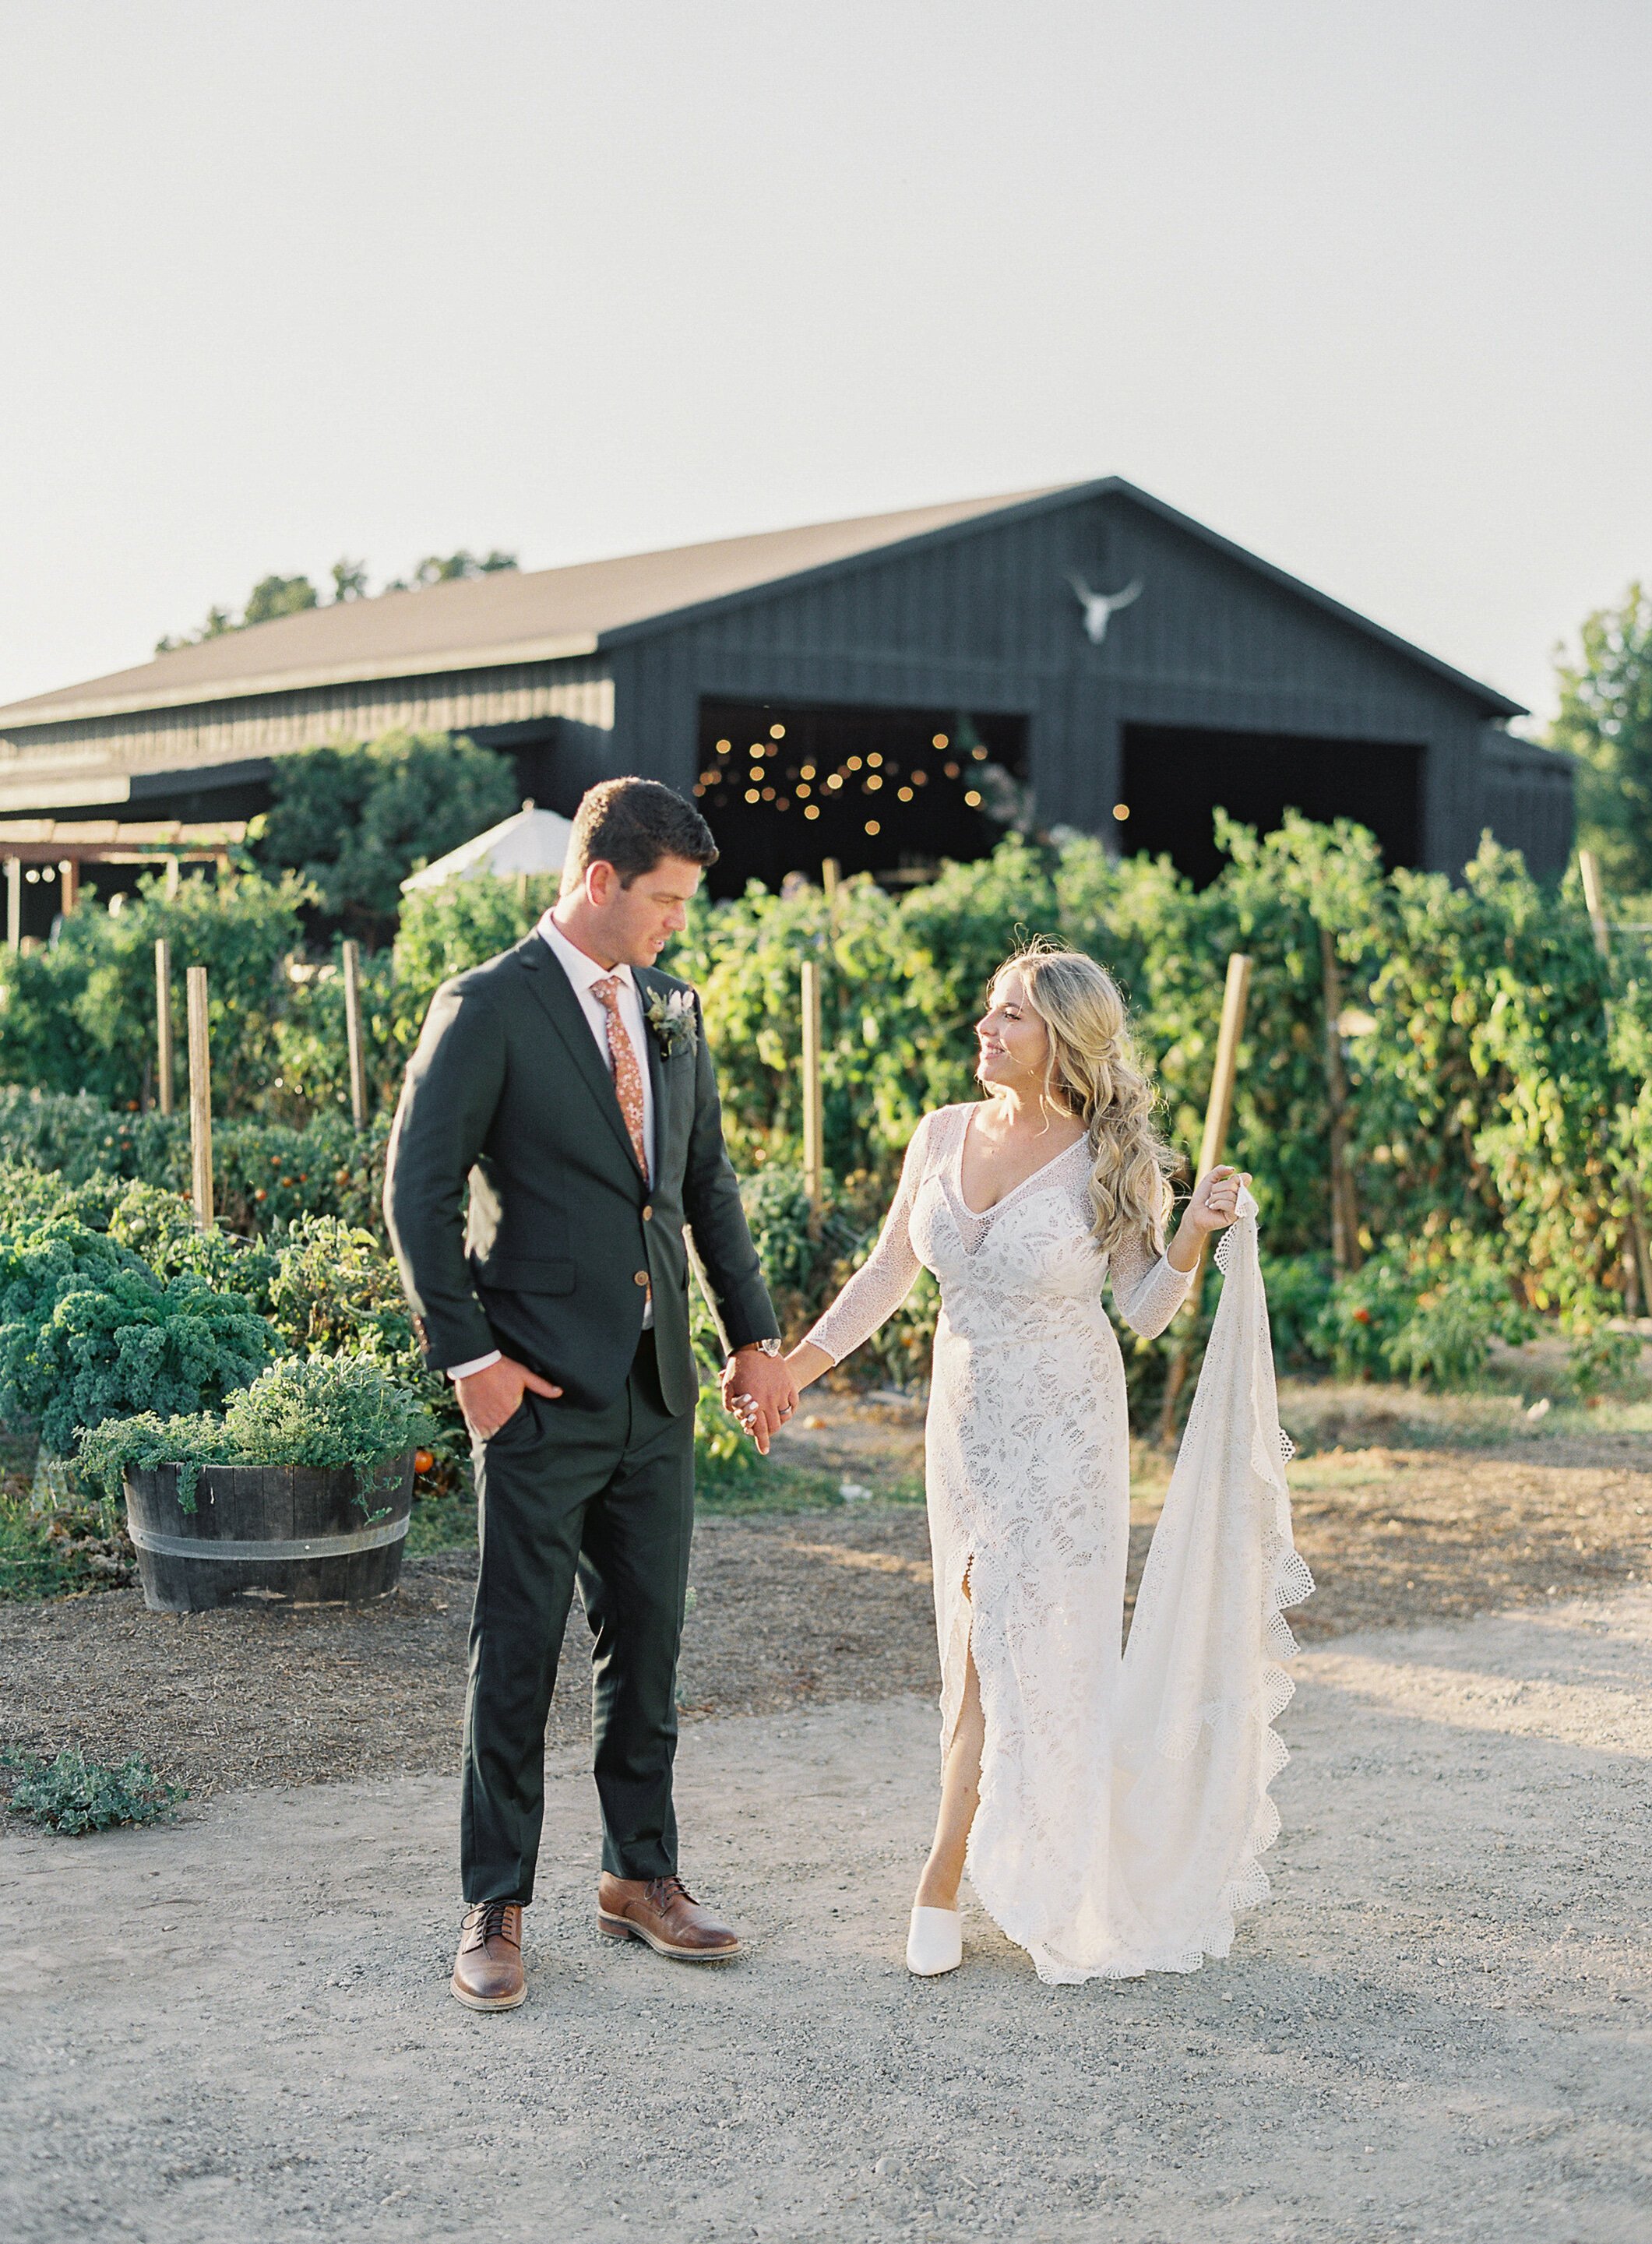 www.santabarbarawedding.com | Sposto Photography | Roblar Farm | Palm + Pine Events | Green Apple Event Co. | Petals + Pop | Chris Verducci | Grace Loves Lace | Grooms Grotto | Couple During Reception